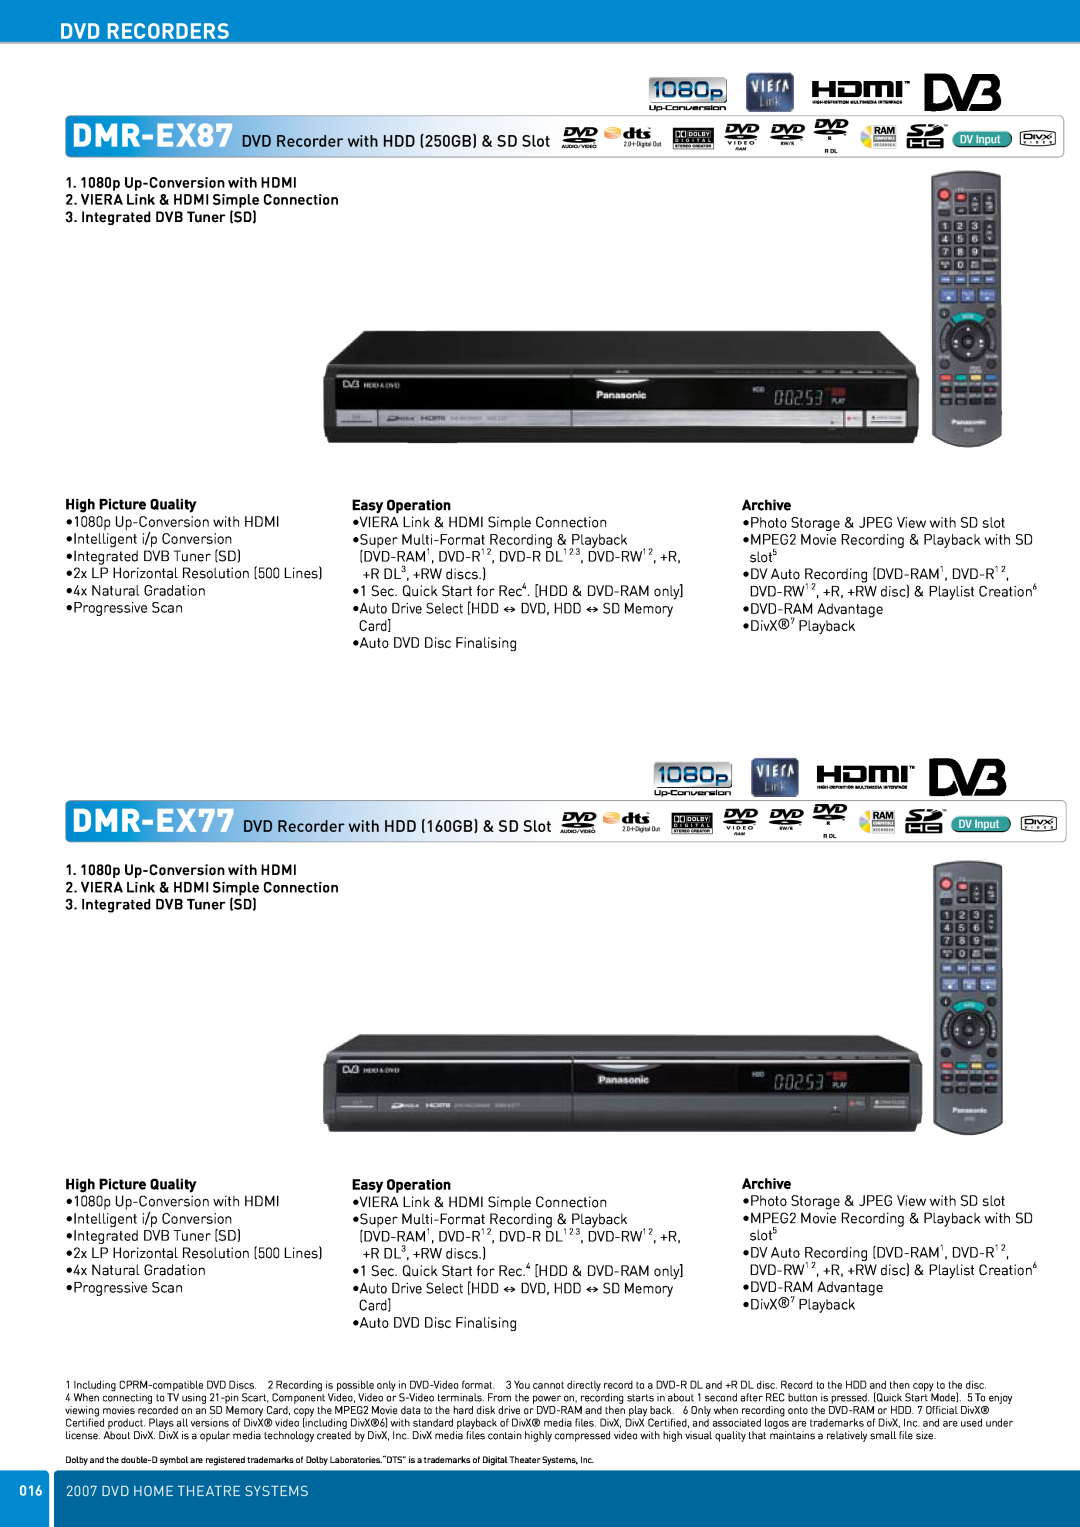 Panasonic DVD Home Theatre System Dvd Recorders, DMR-EX87 DVD Recorder with HDD 250GB & SD Slot, High Picture Quality 